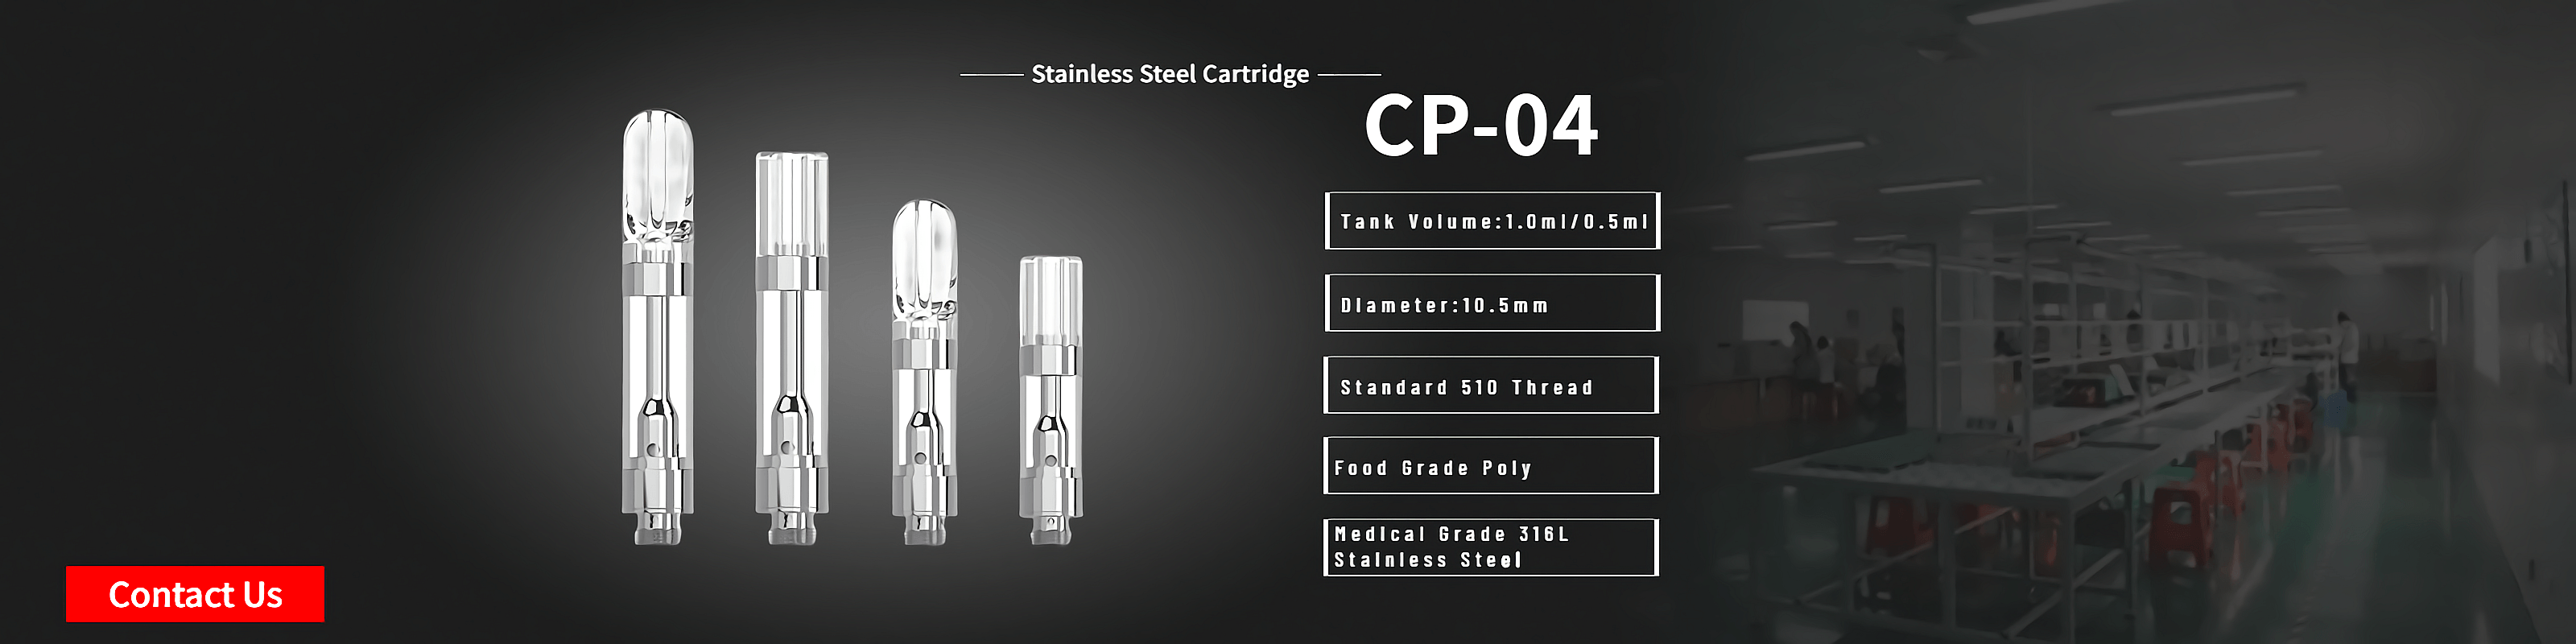 CP-04 Stainless steel cartridge